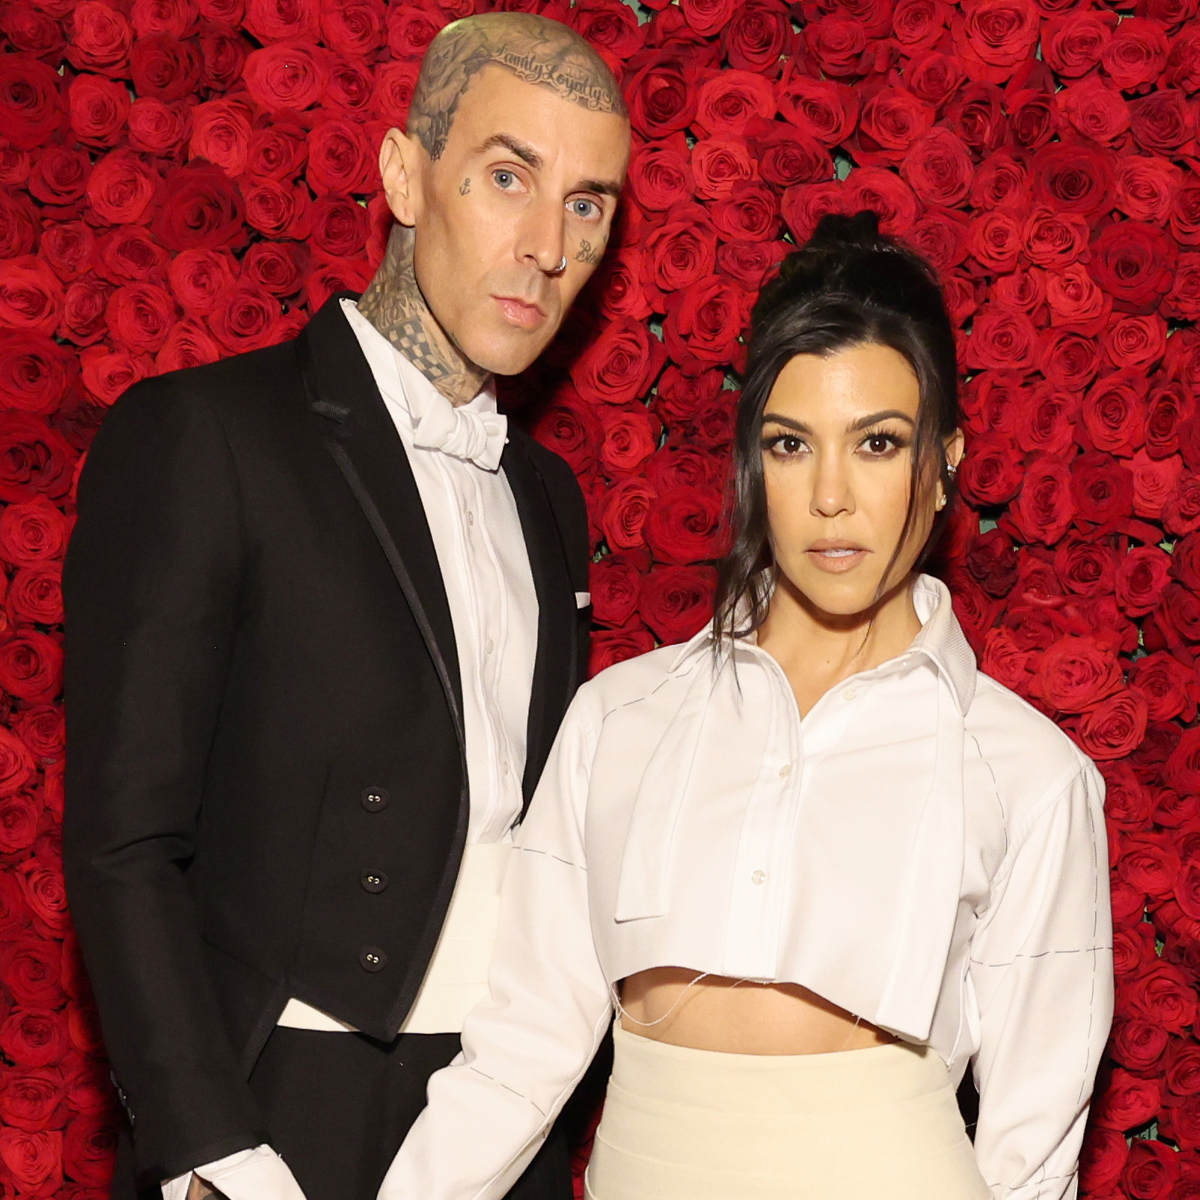 Pregnant Kourtney Kardashian has revealed the gender of her baby with Travis Barker, and it’s going to be a boy.